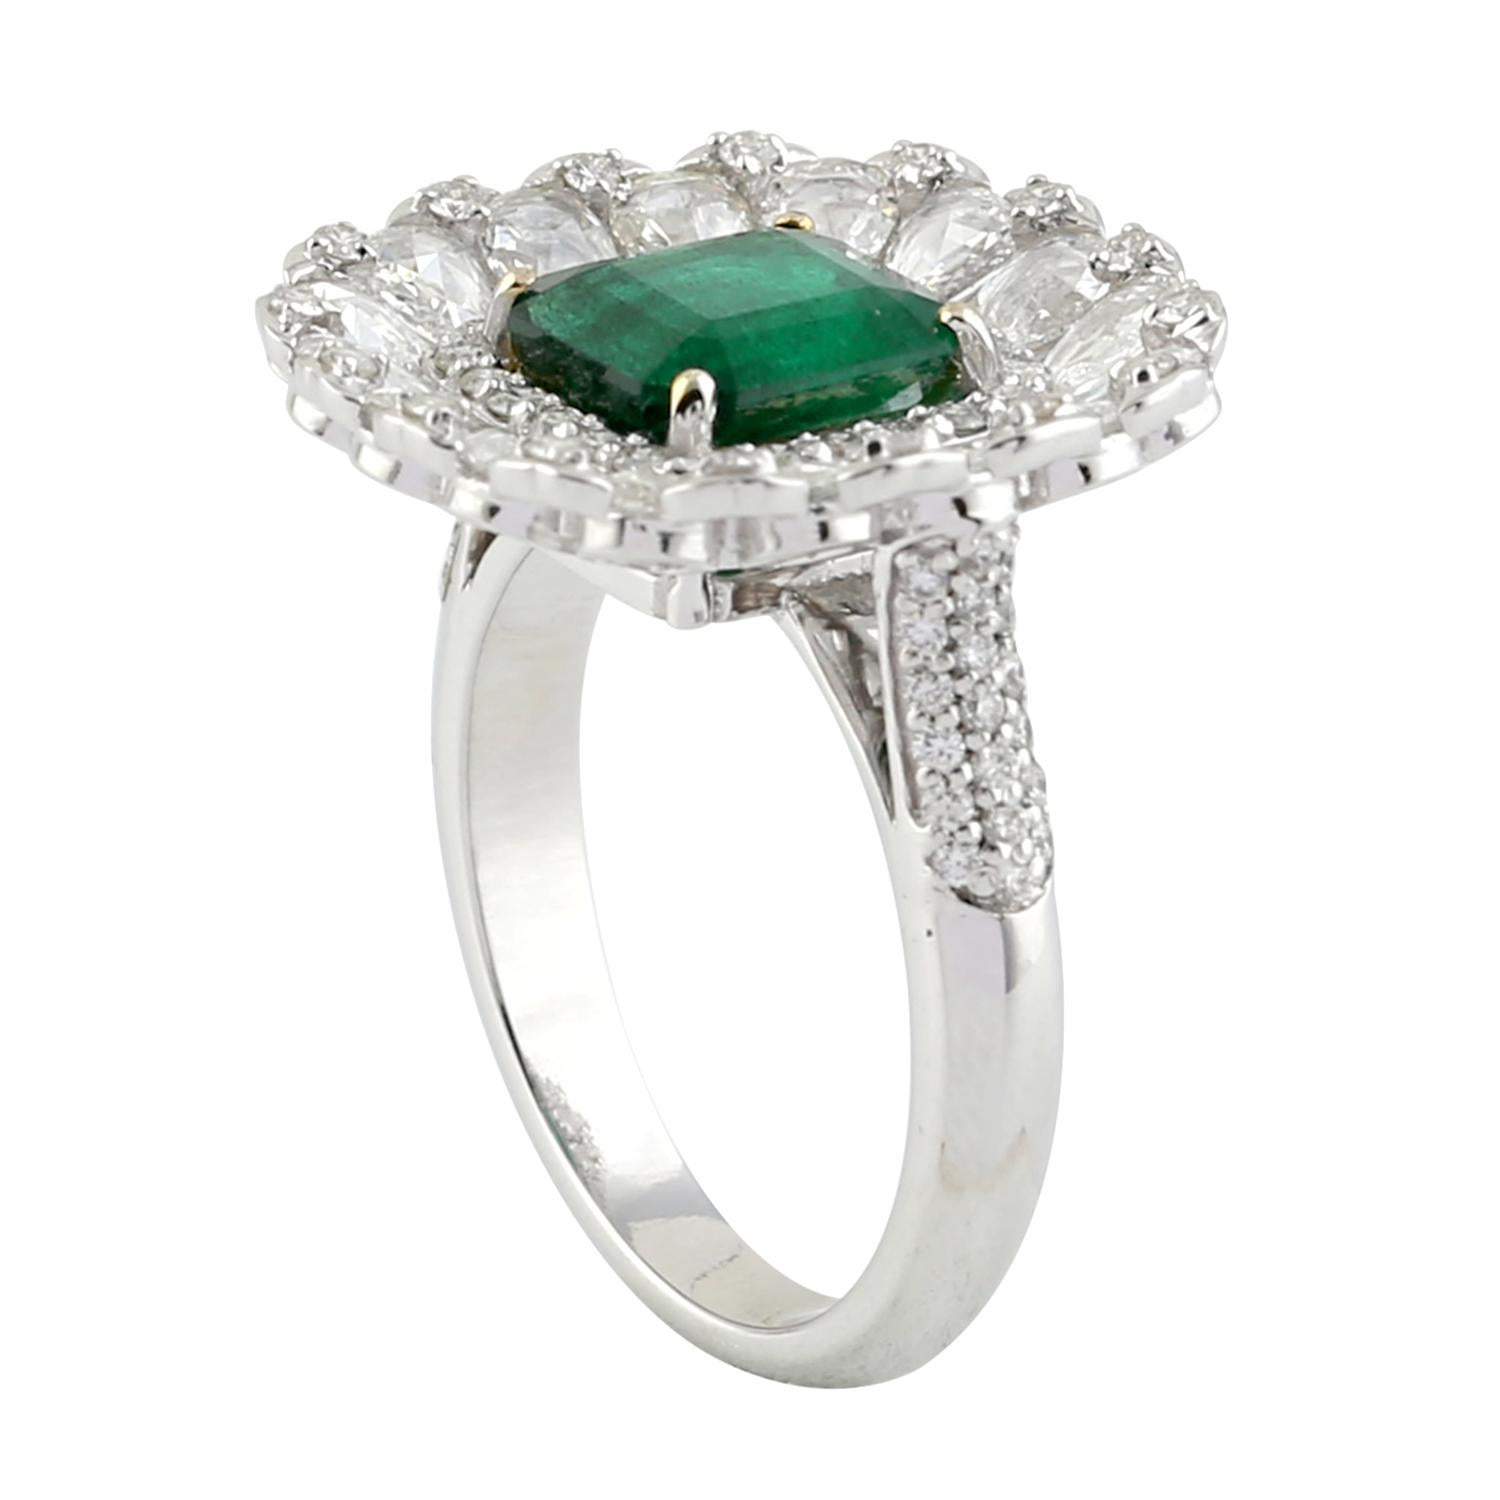 Art Deco Princess Cut Emerald Ring with Diamonds Around in 18K White Gold For Sale